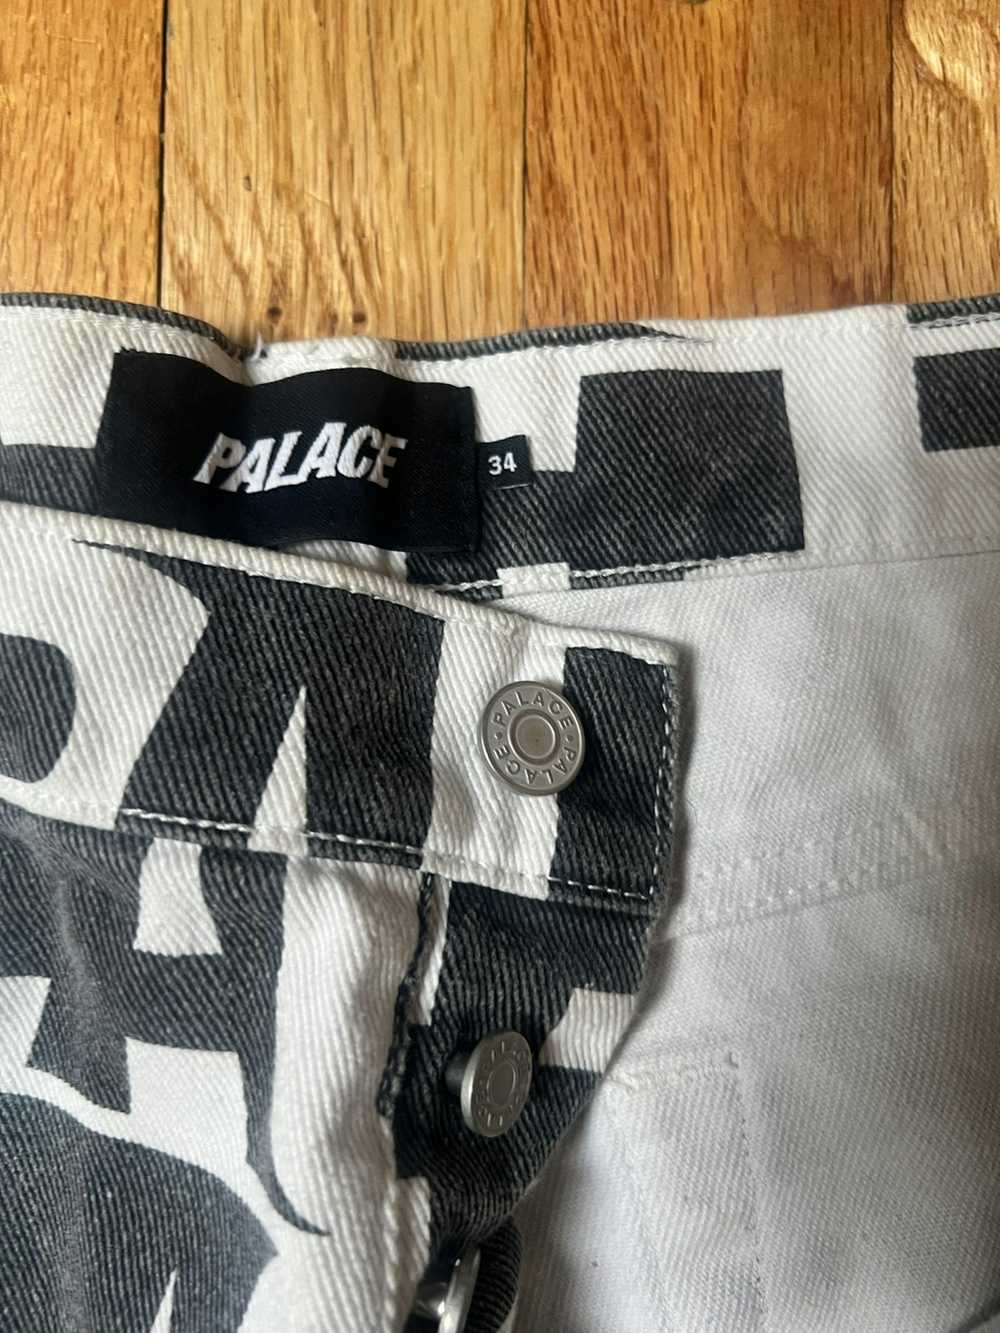 Palace Palace Repeater Denim Jeans - image 3